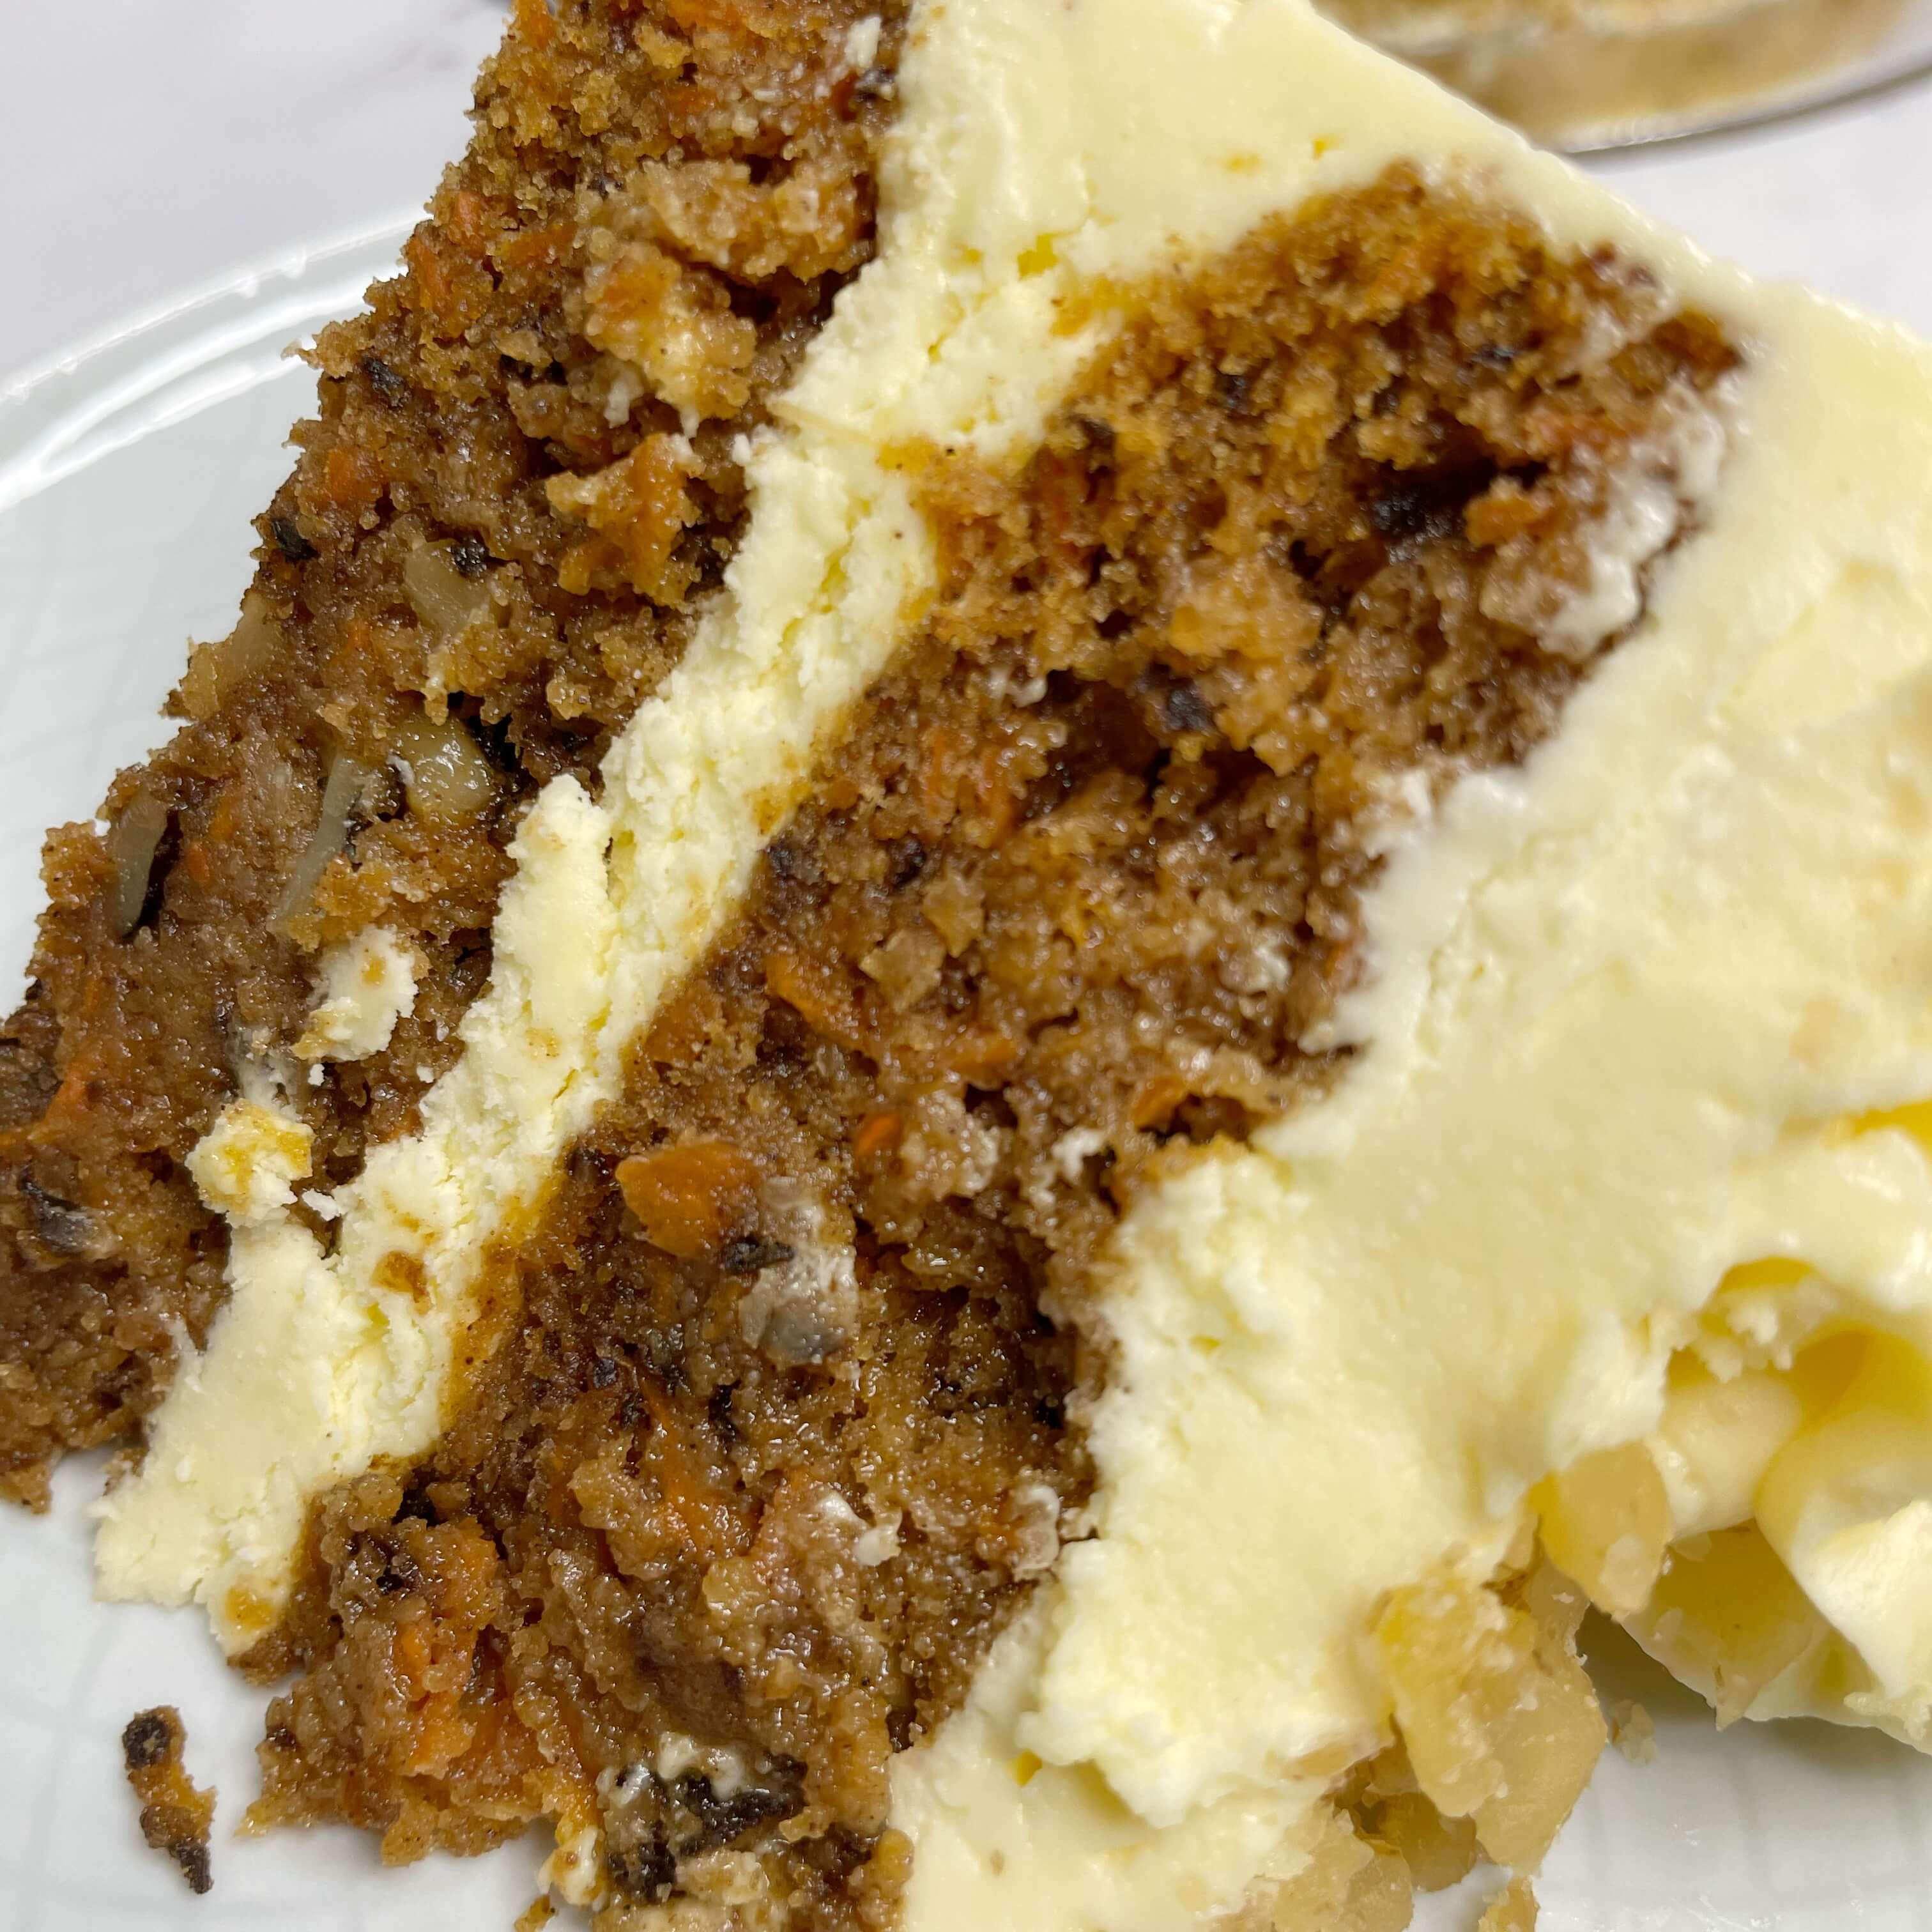 LOCABA's Low-Carb Keto Carrot Cake: light and so delicious!